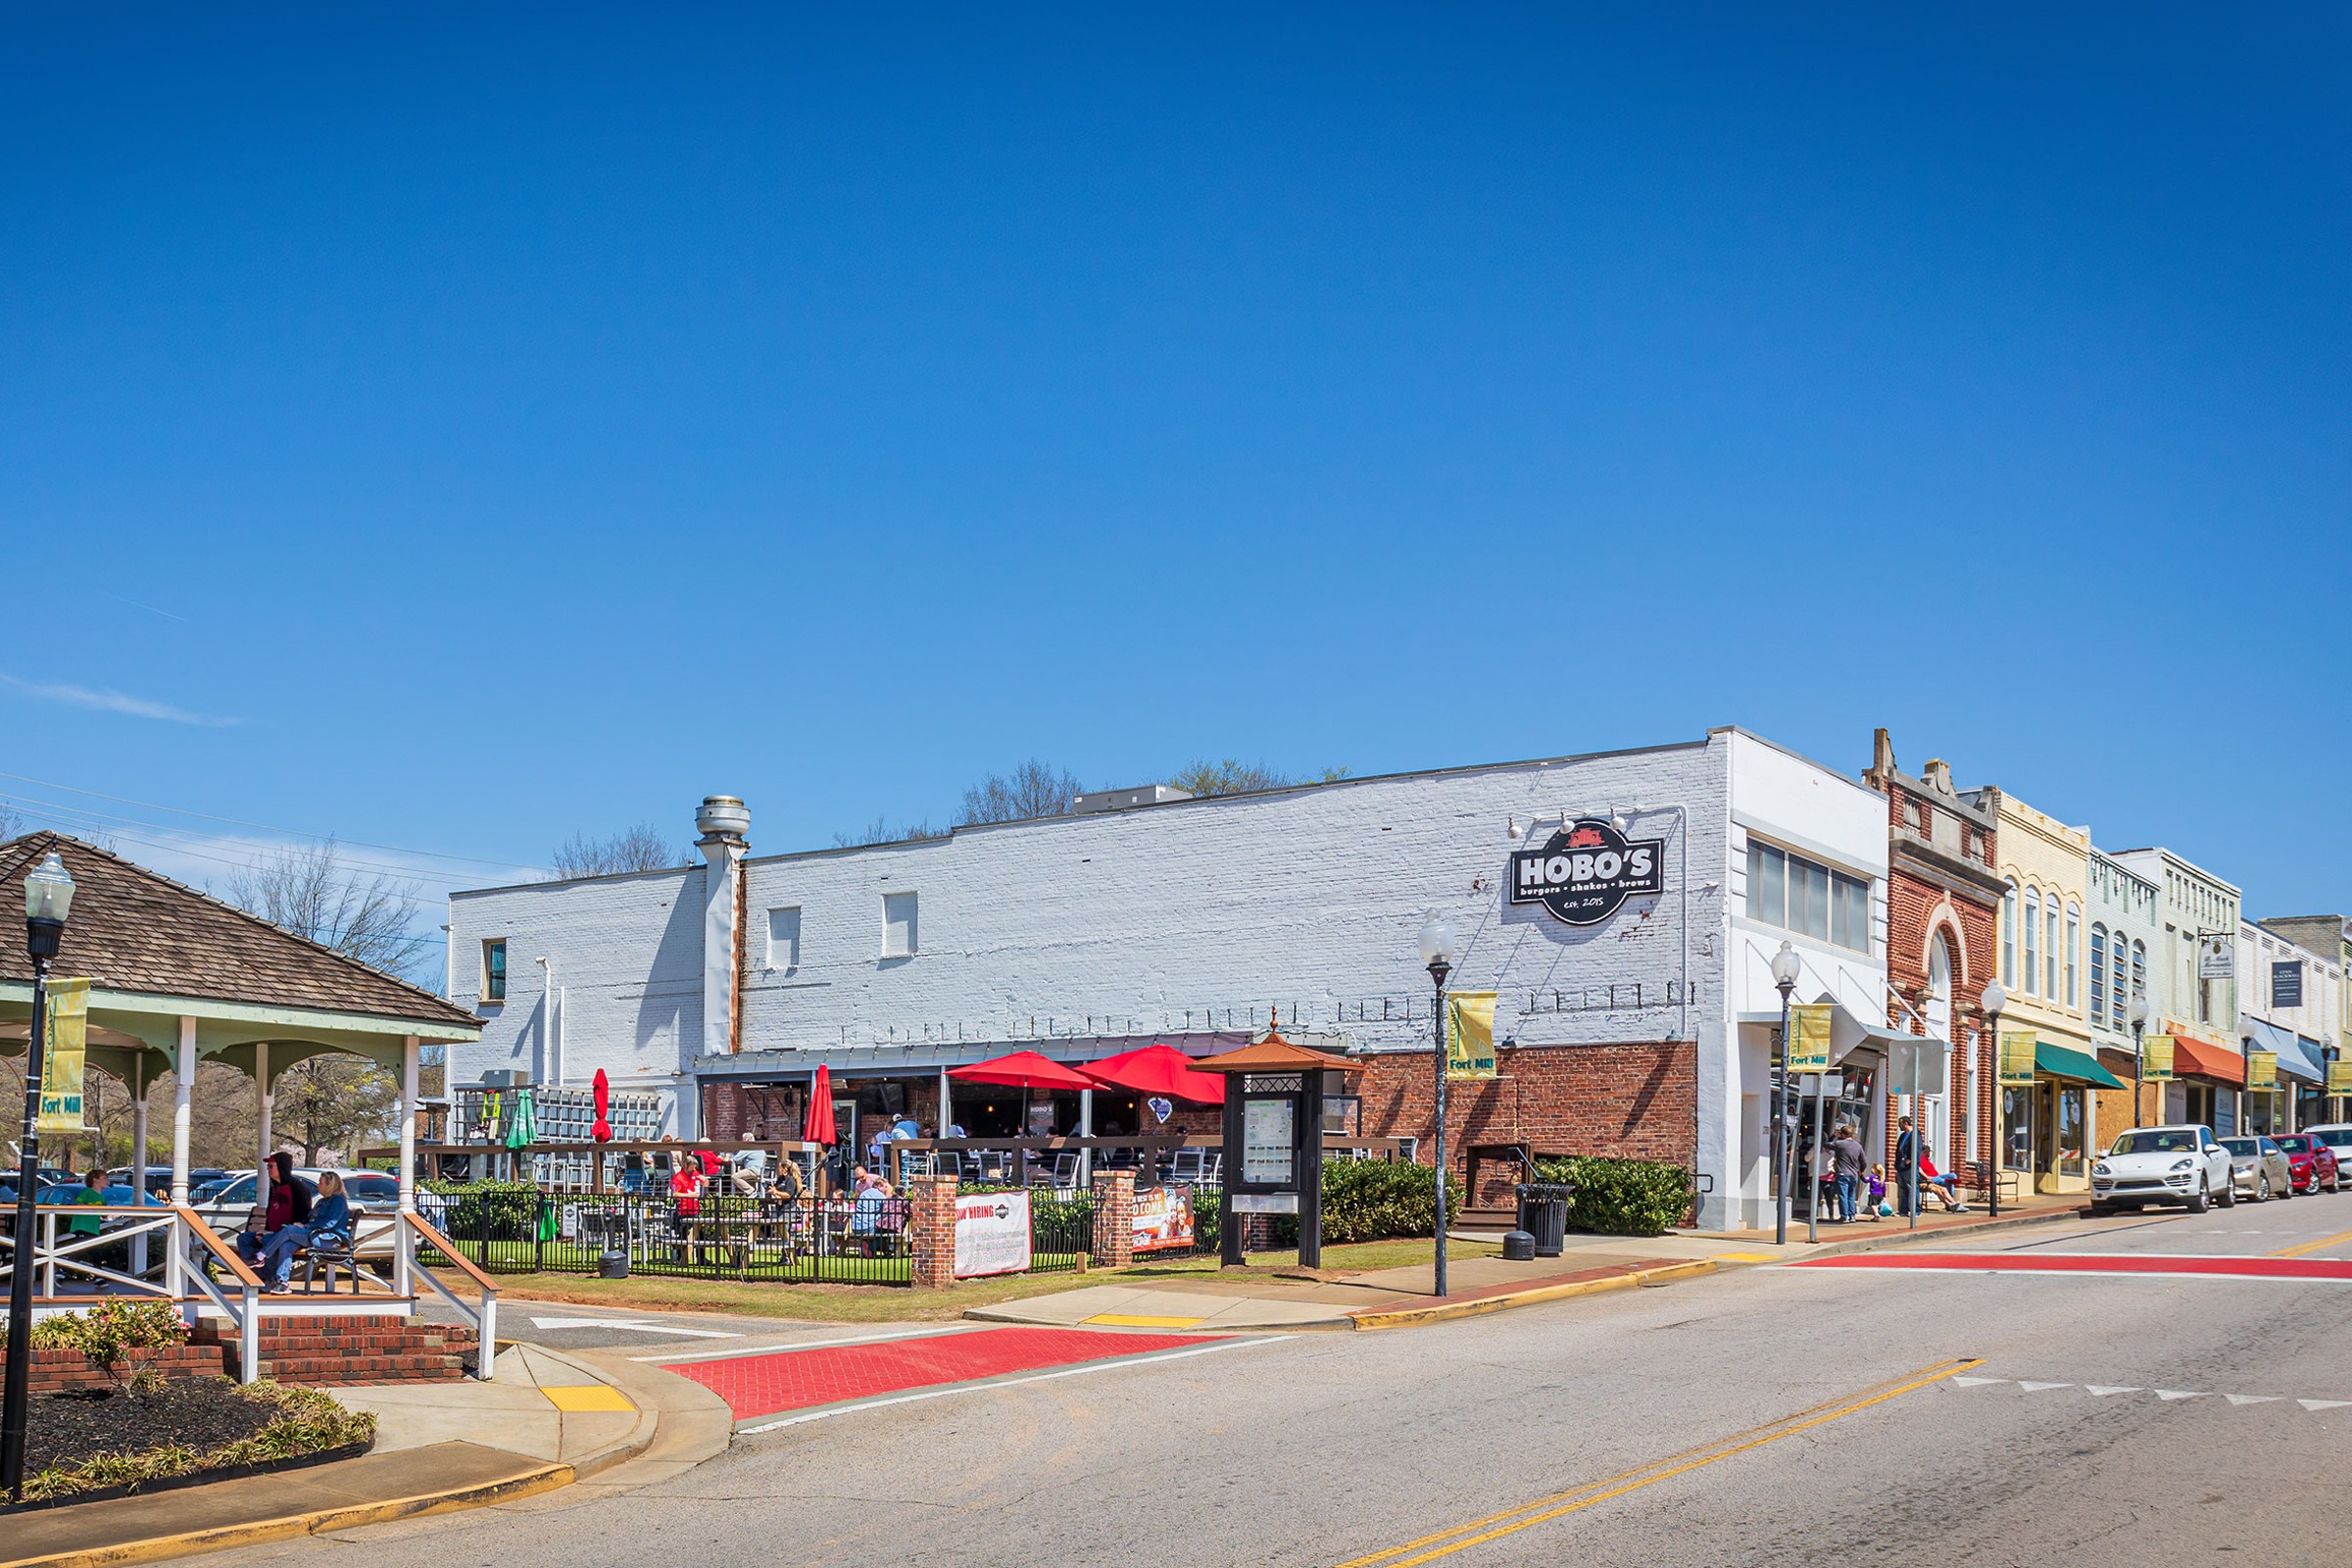 Things to Do in Fort Mill, An Insider's Guide